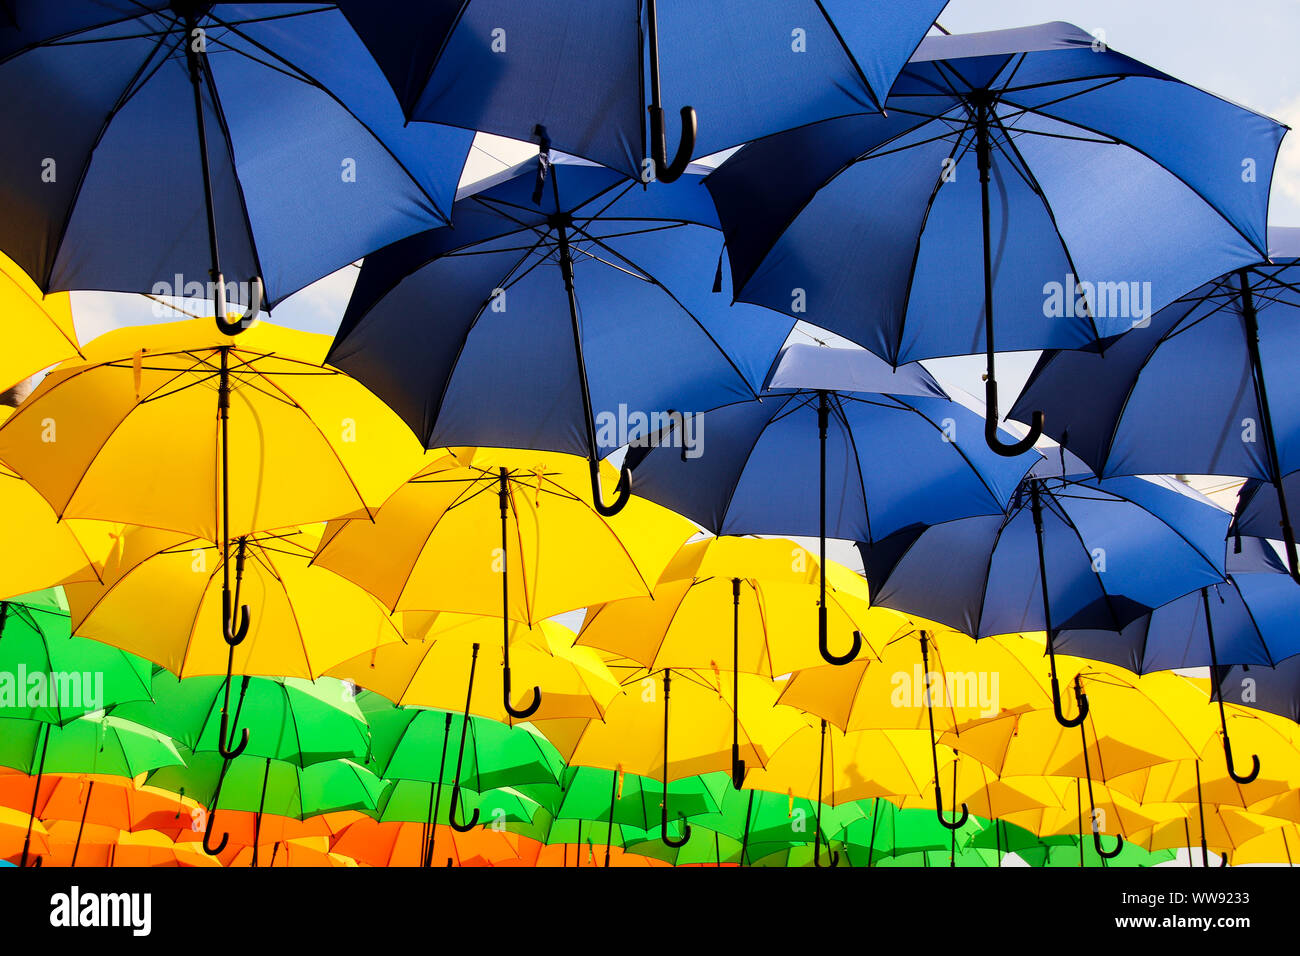 Colorful umbrellas decoration welcoming the summer Stock Photo